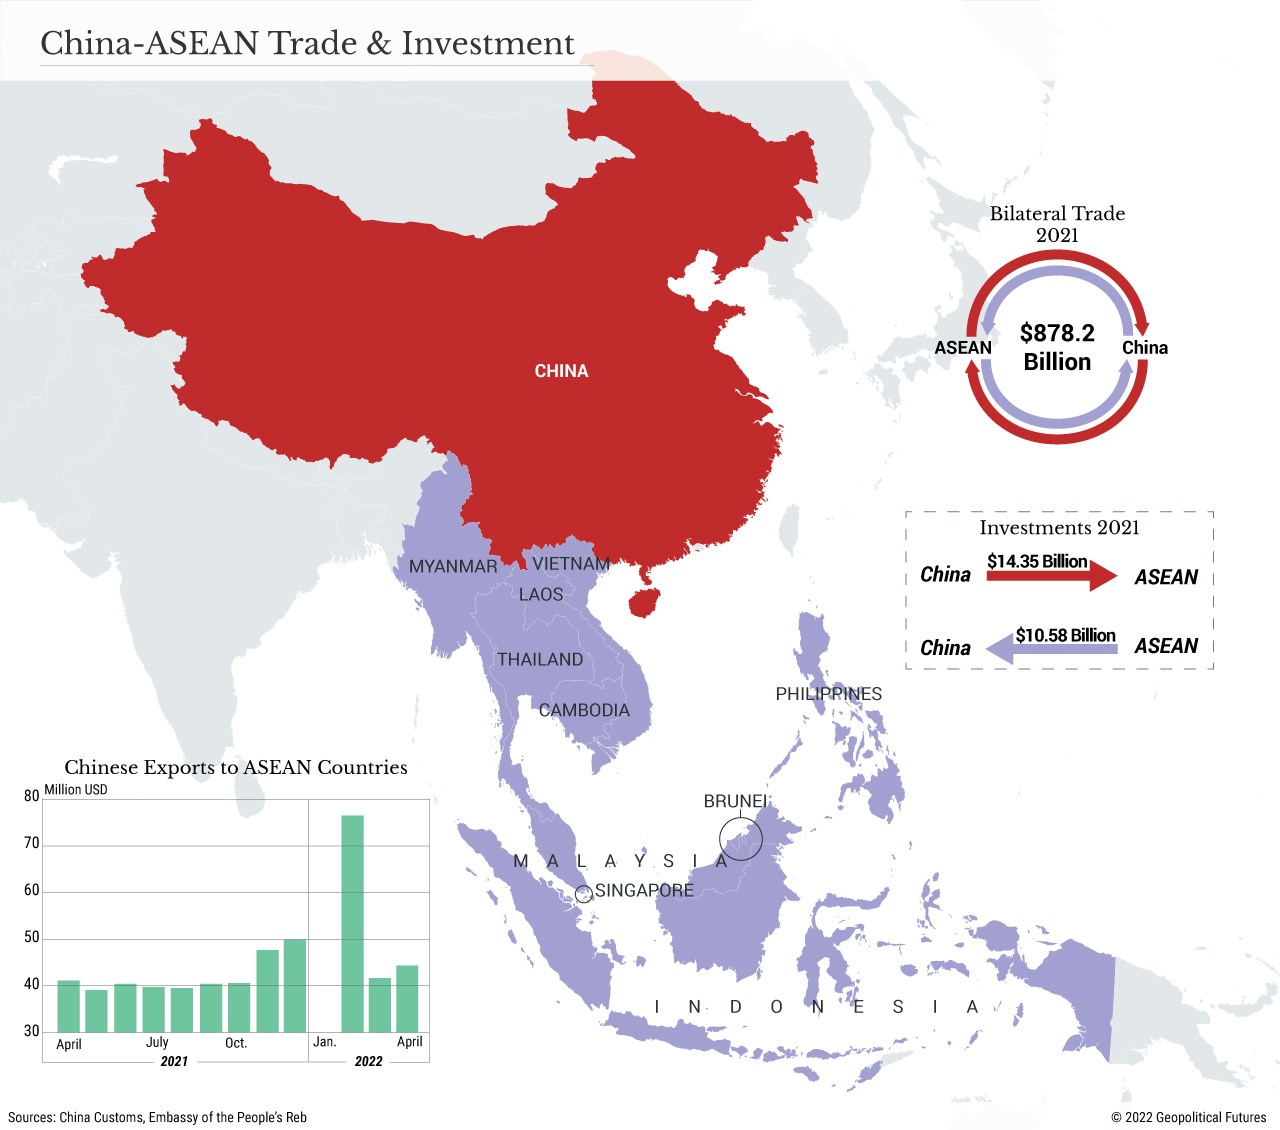 China-ASEAN Trade & Investment